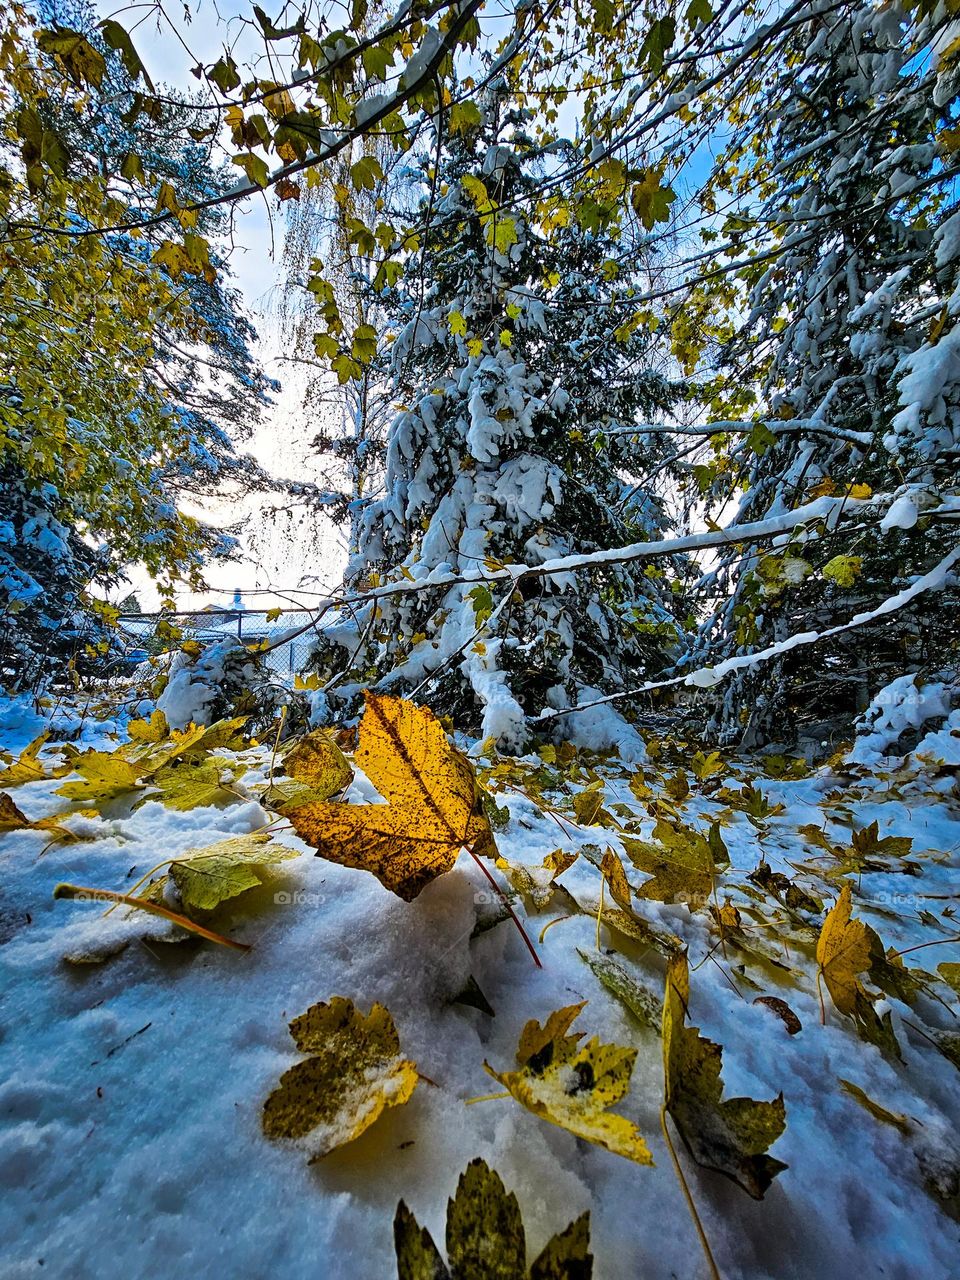 Welcome November . 
The last touch of fall when the snow arrived  colorful leafs into the snow. Smashing atumn into  winter.